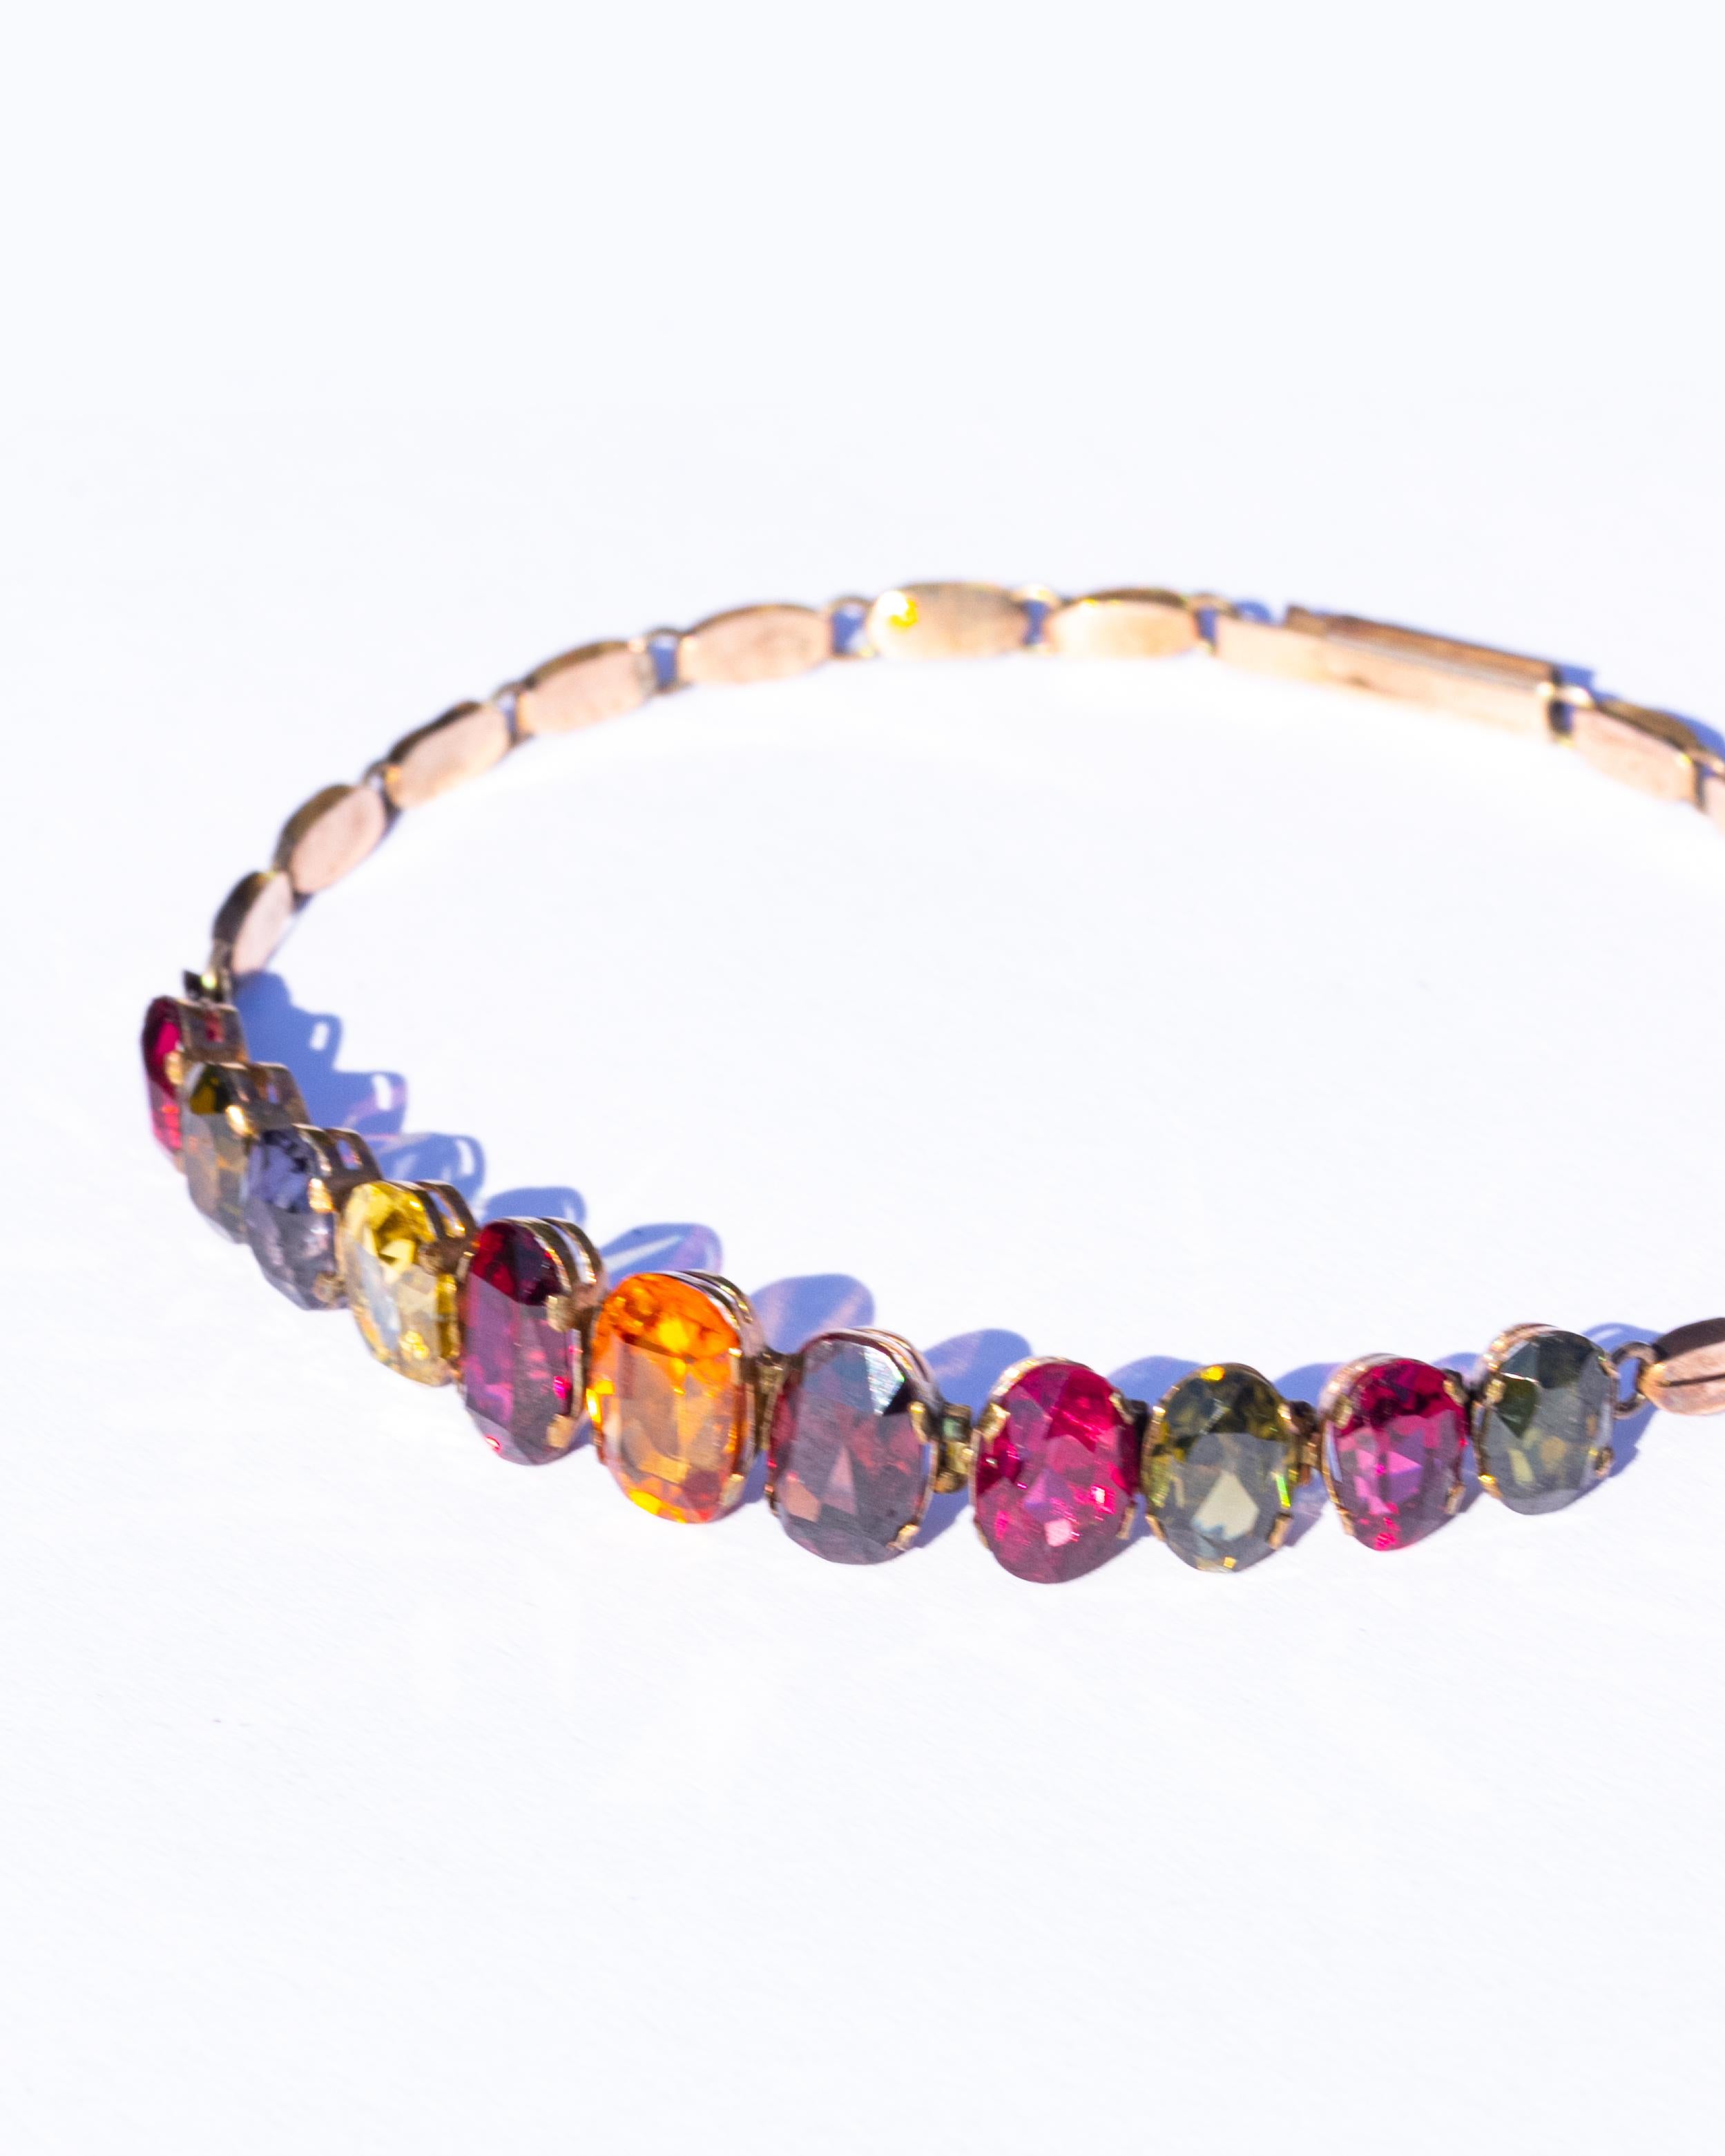 This gorgeous bracelet holds eleven beautiful stones that are wonderfully bright and sparkly. Modelled in 9ct gold.  

Length: 20.5cm
Width: 10mm

Weight: 7.6g